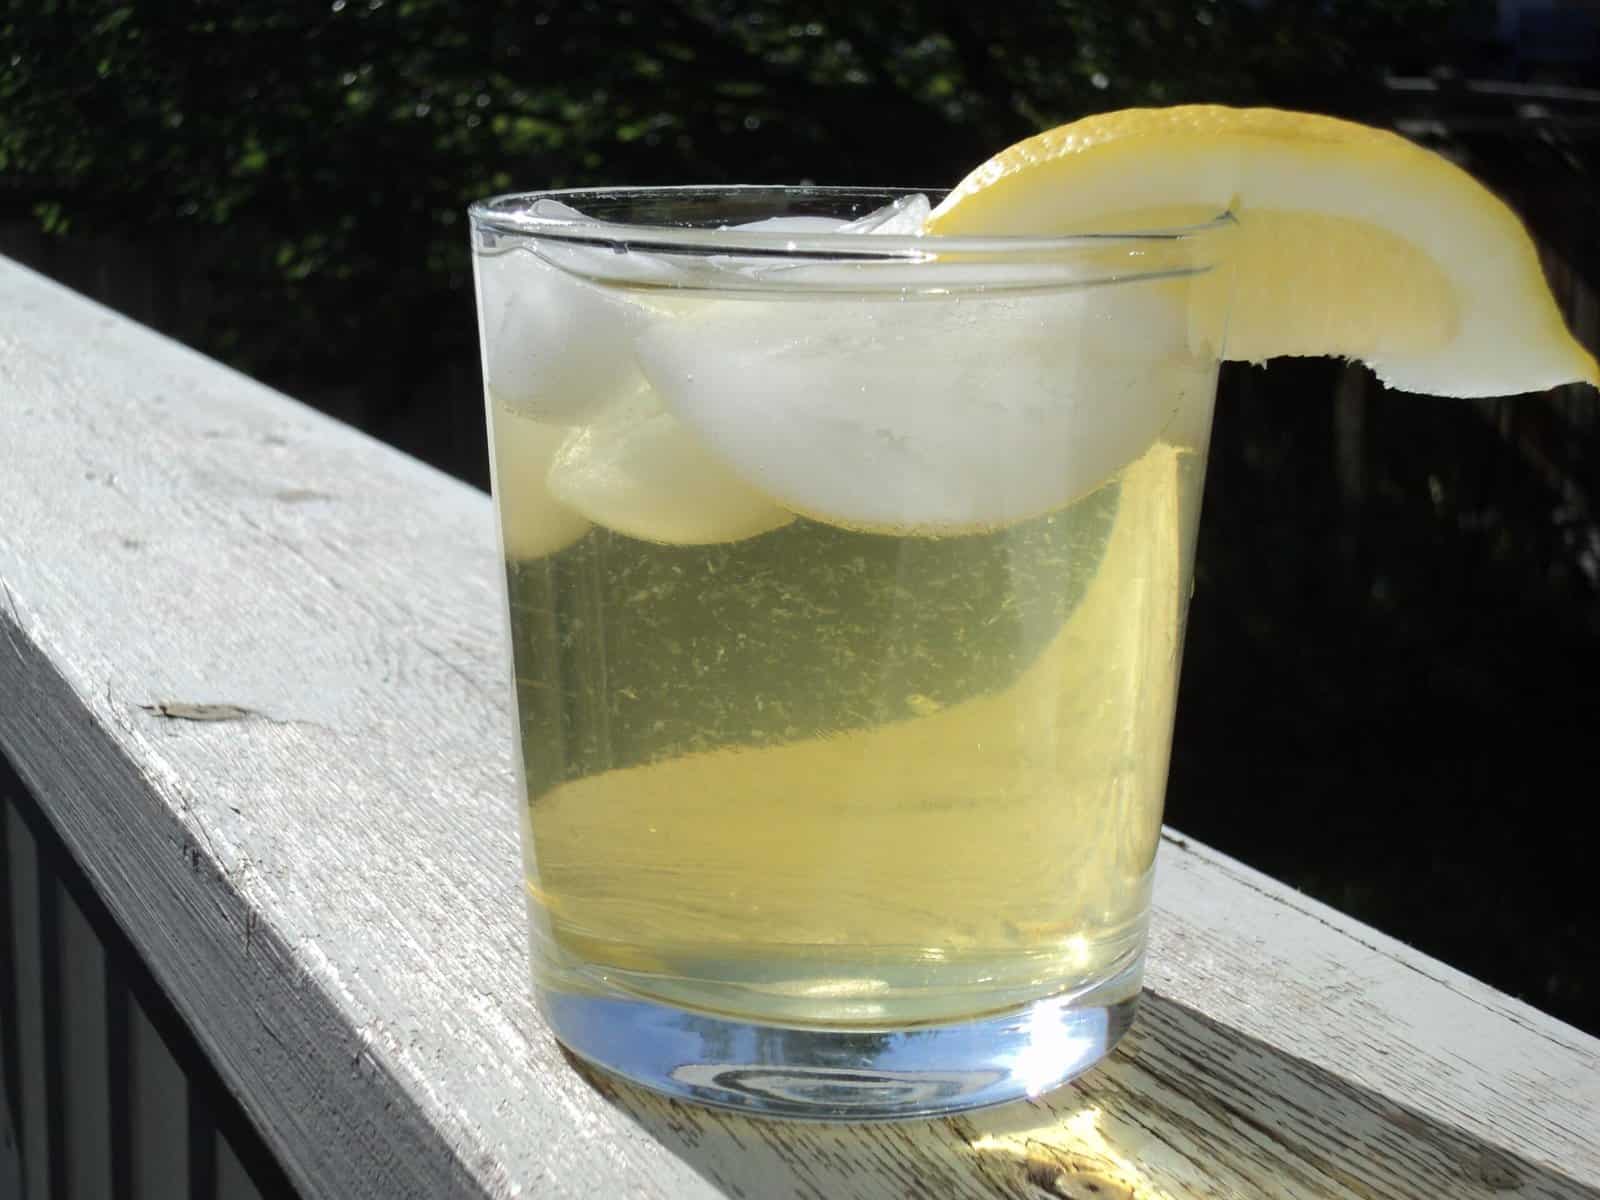  This drink will quench your thirst on a hot summer day.